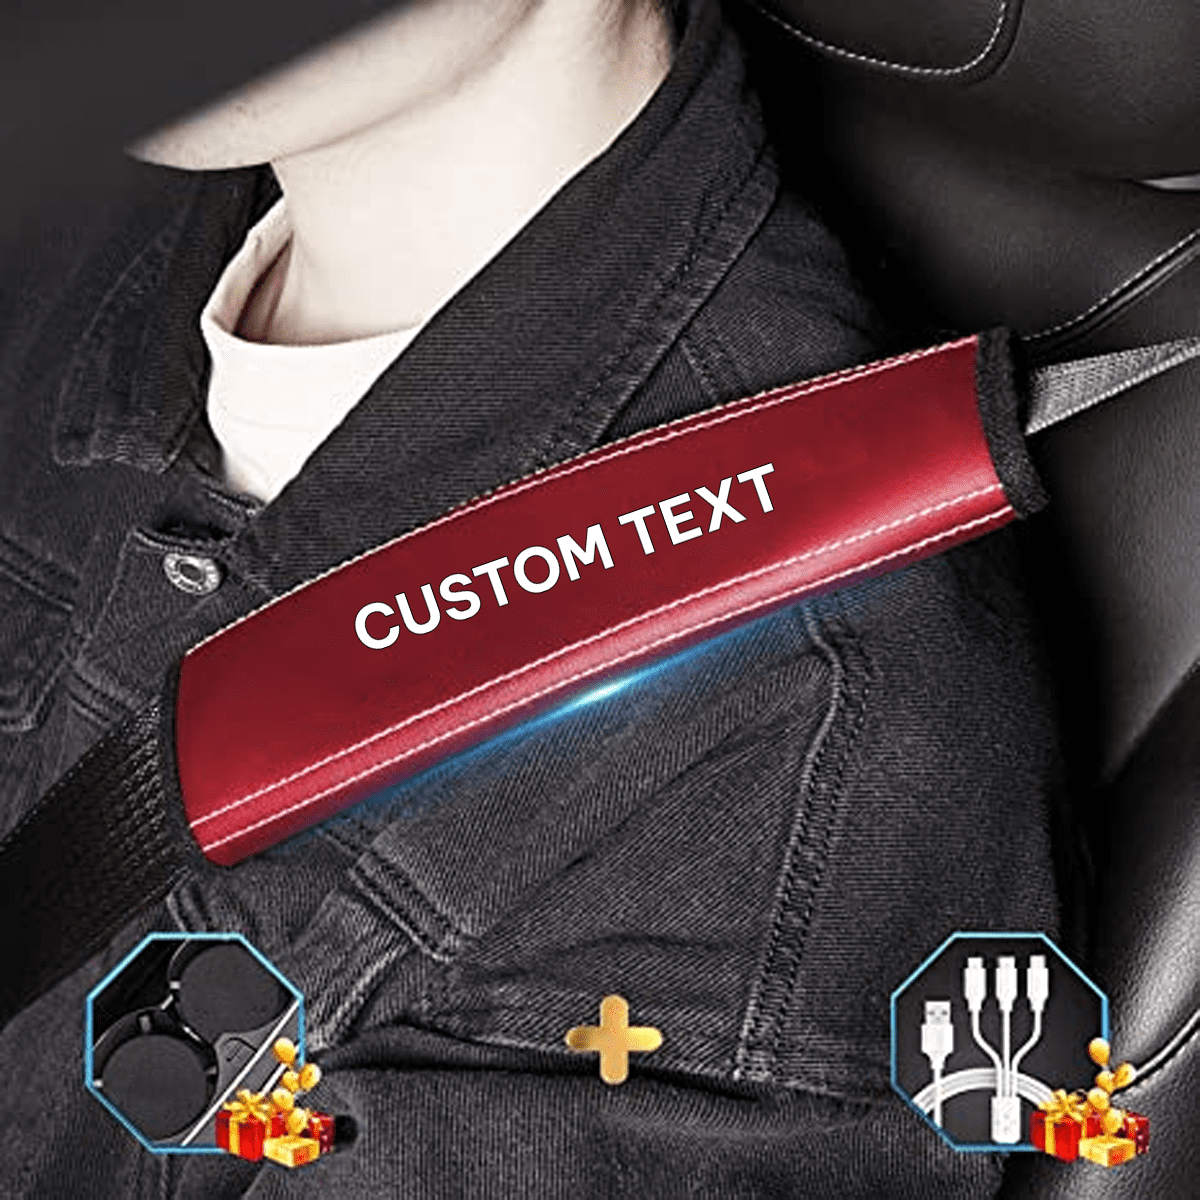 Custom Text and Logo Seat Belt Covers, Fit with Honda, Microfiber Leather Seat Belt Shoulder Pads for More Comfortable Driving, Set of 2pcs - Delicate Leather